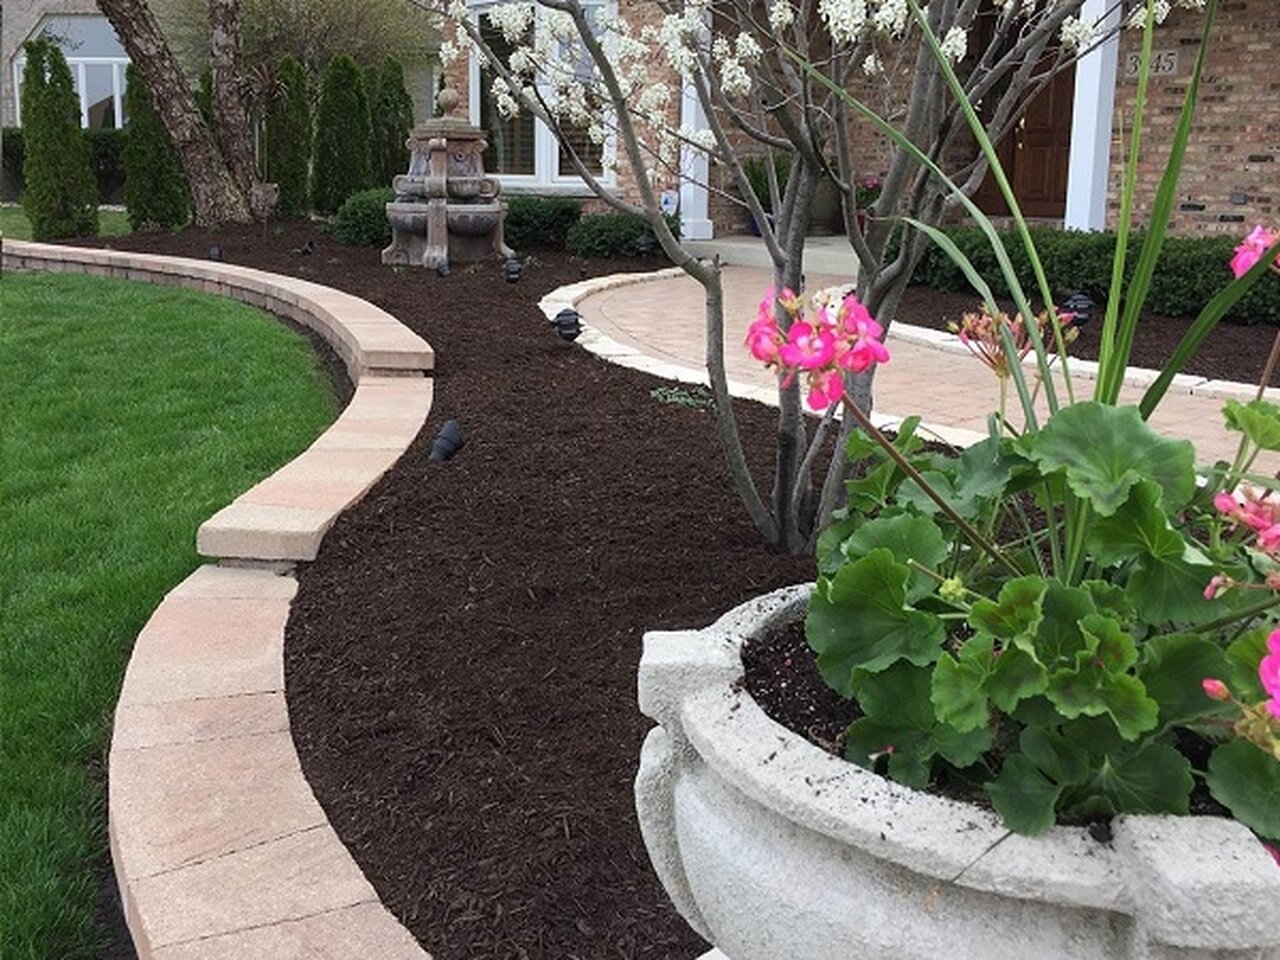 Mulch  | Learn More →&lt;strong&gt;High quality product and you don't have to get dirty.&lt;/strong&gt;&lt;a&gt;&lt;/a&gt;